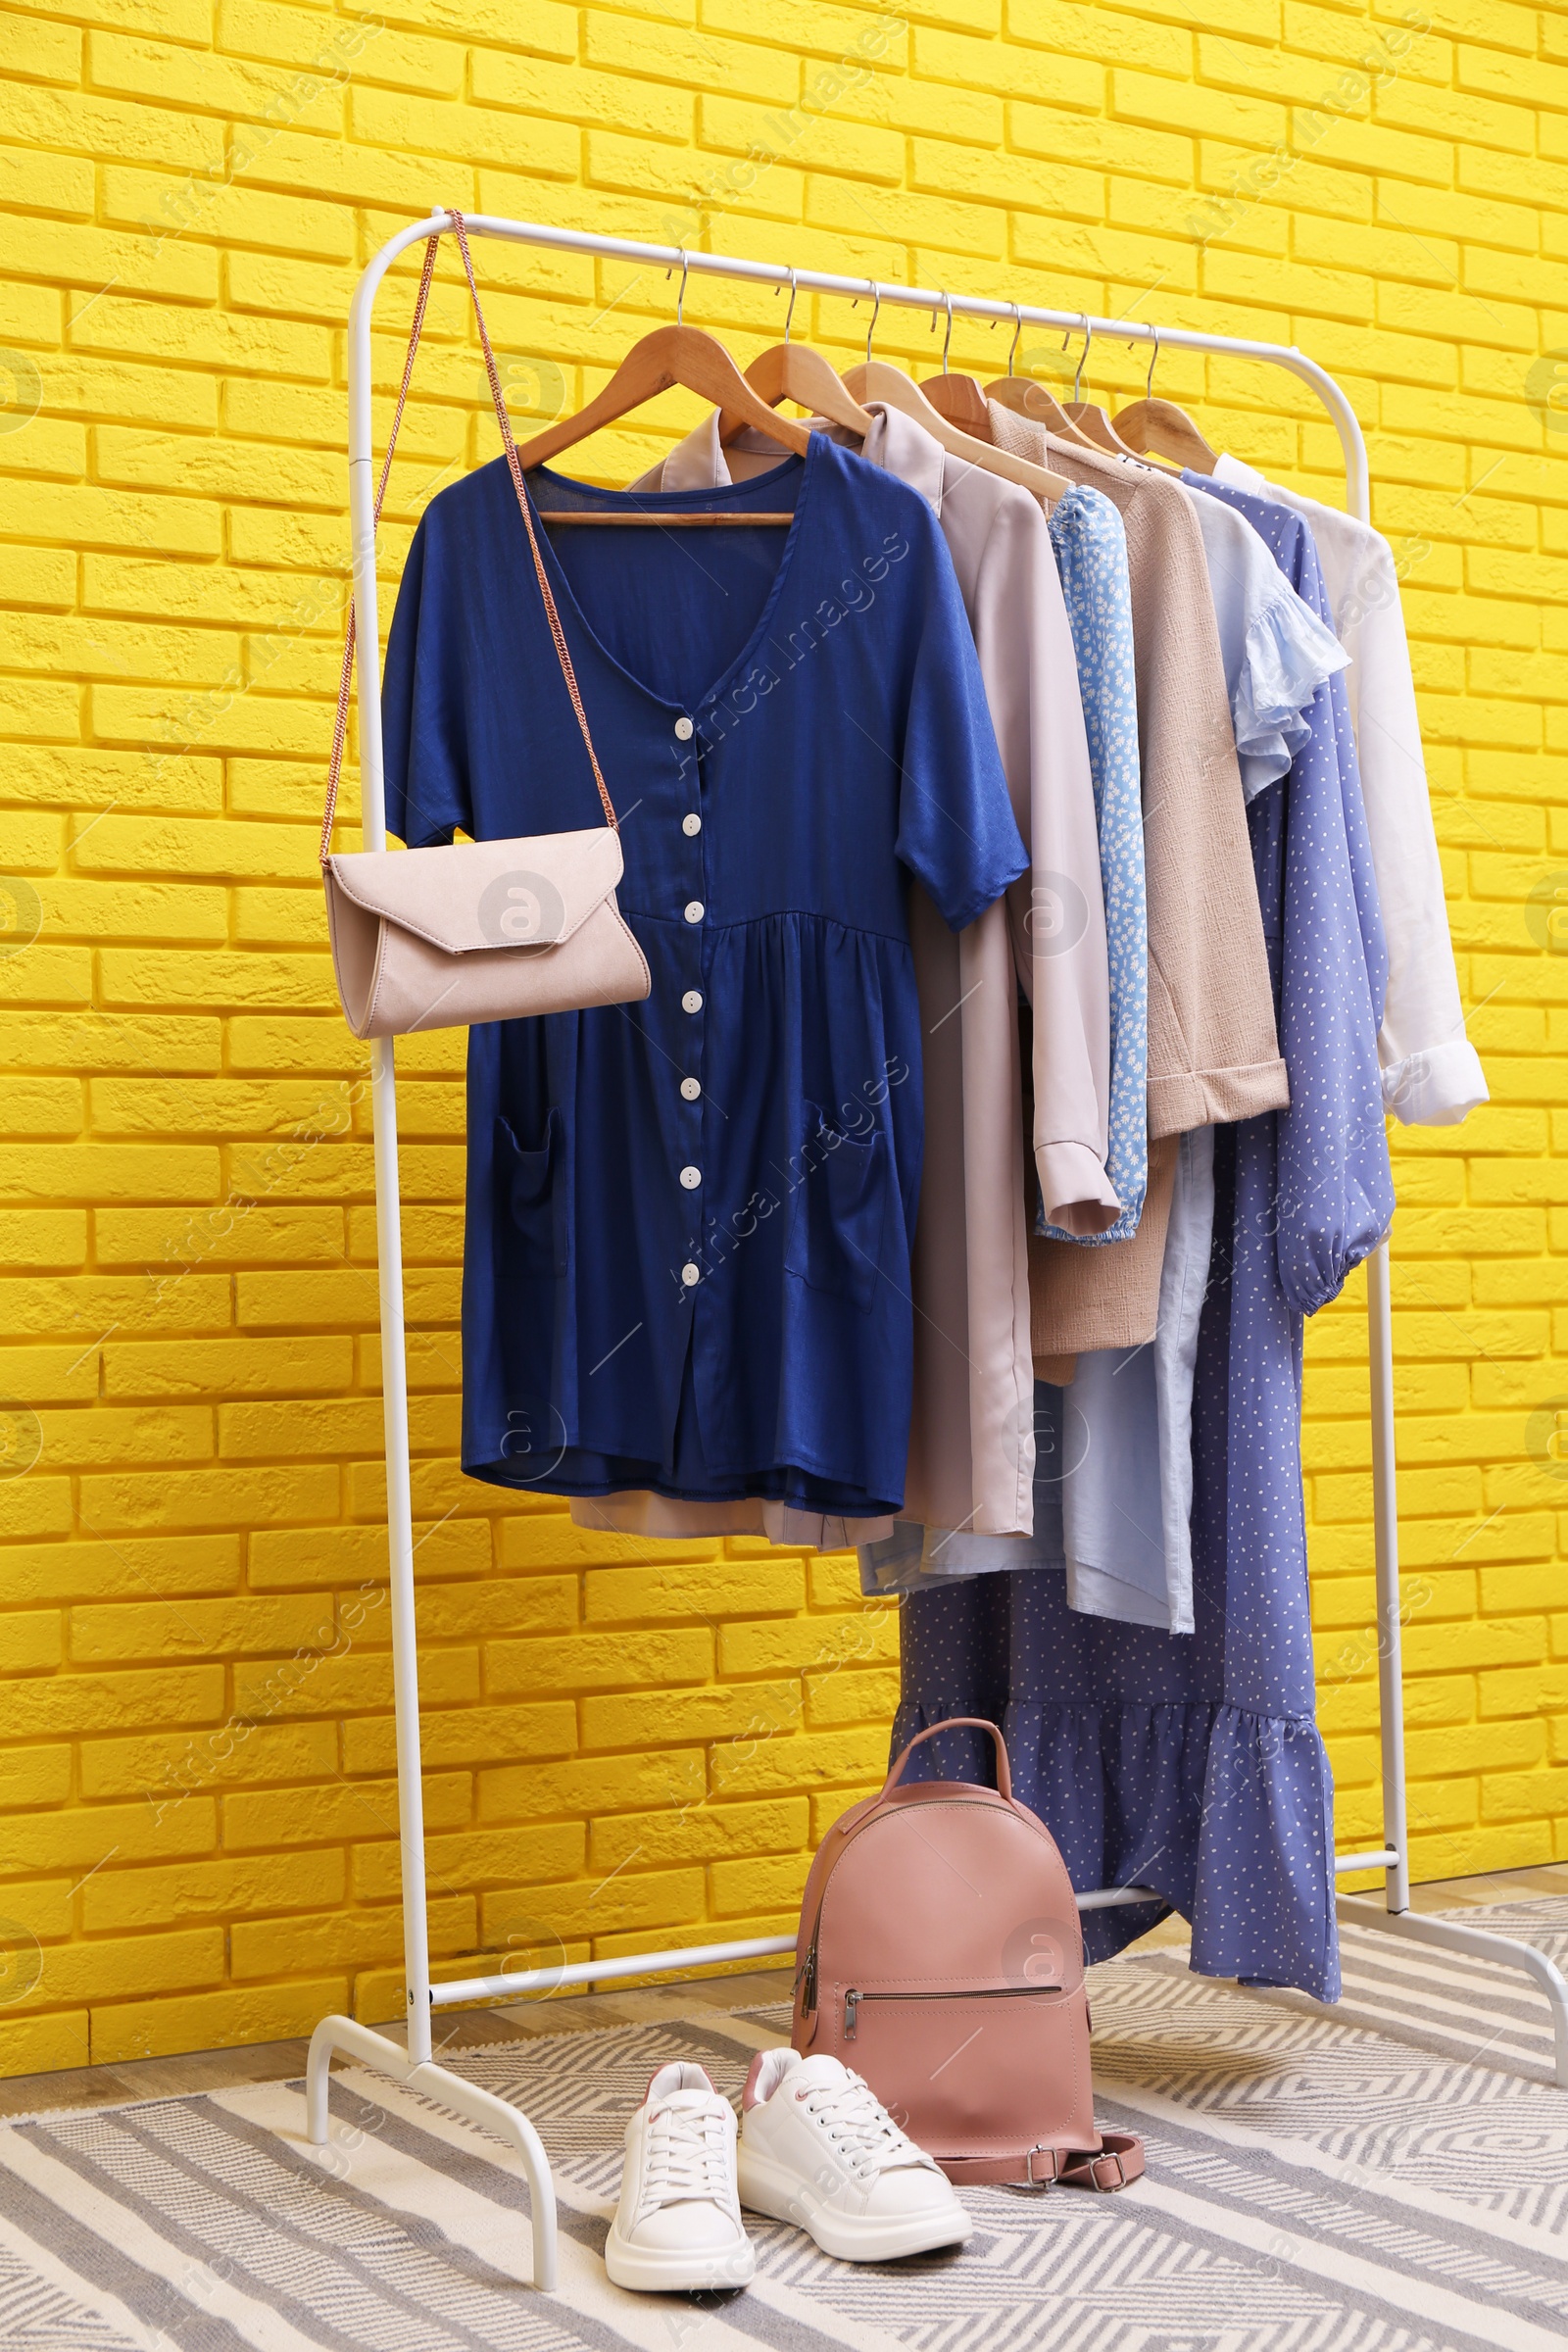 Photo of Rack with different stylish clothes near yellow brick wall in room